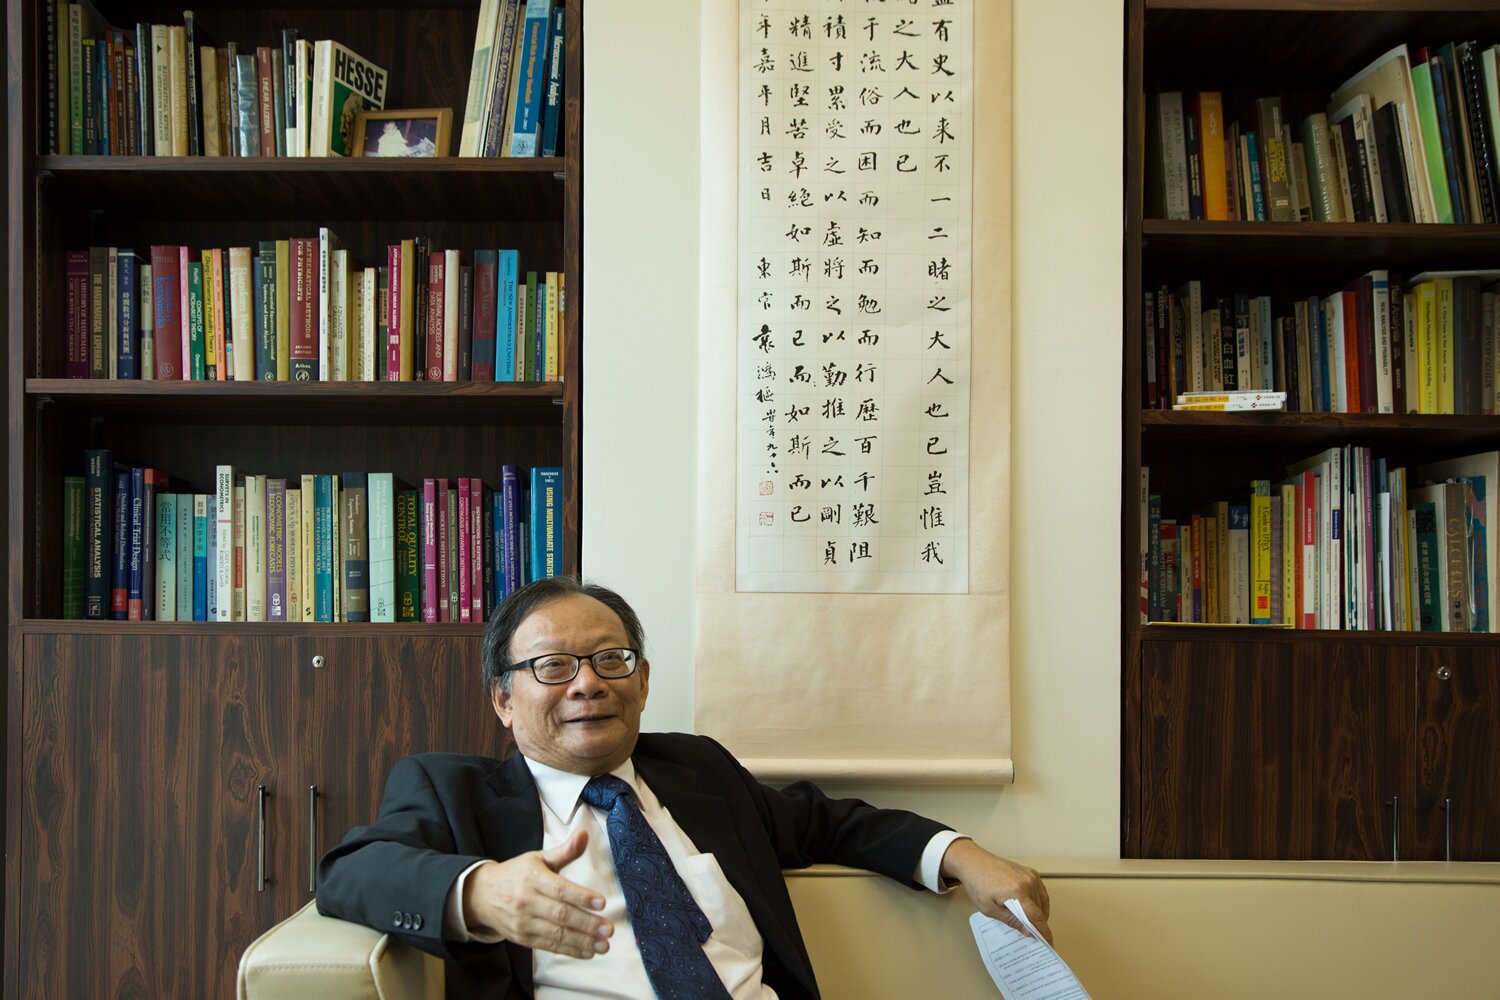 Referring to the experience of Mr Zeng Guofan (曾国藩) and Mr Liang Qichao (梁启超) in the Qing Dynasty, Professor Li emphasised that perseverance and diligence have been his motto throughout his four-decade career as a researcher and will continue to guide him in his new deanship role. “We should trust ourselves and our team despite the ups and downs,” he said. “My experience has shown that we will ultimately find a solution.”